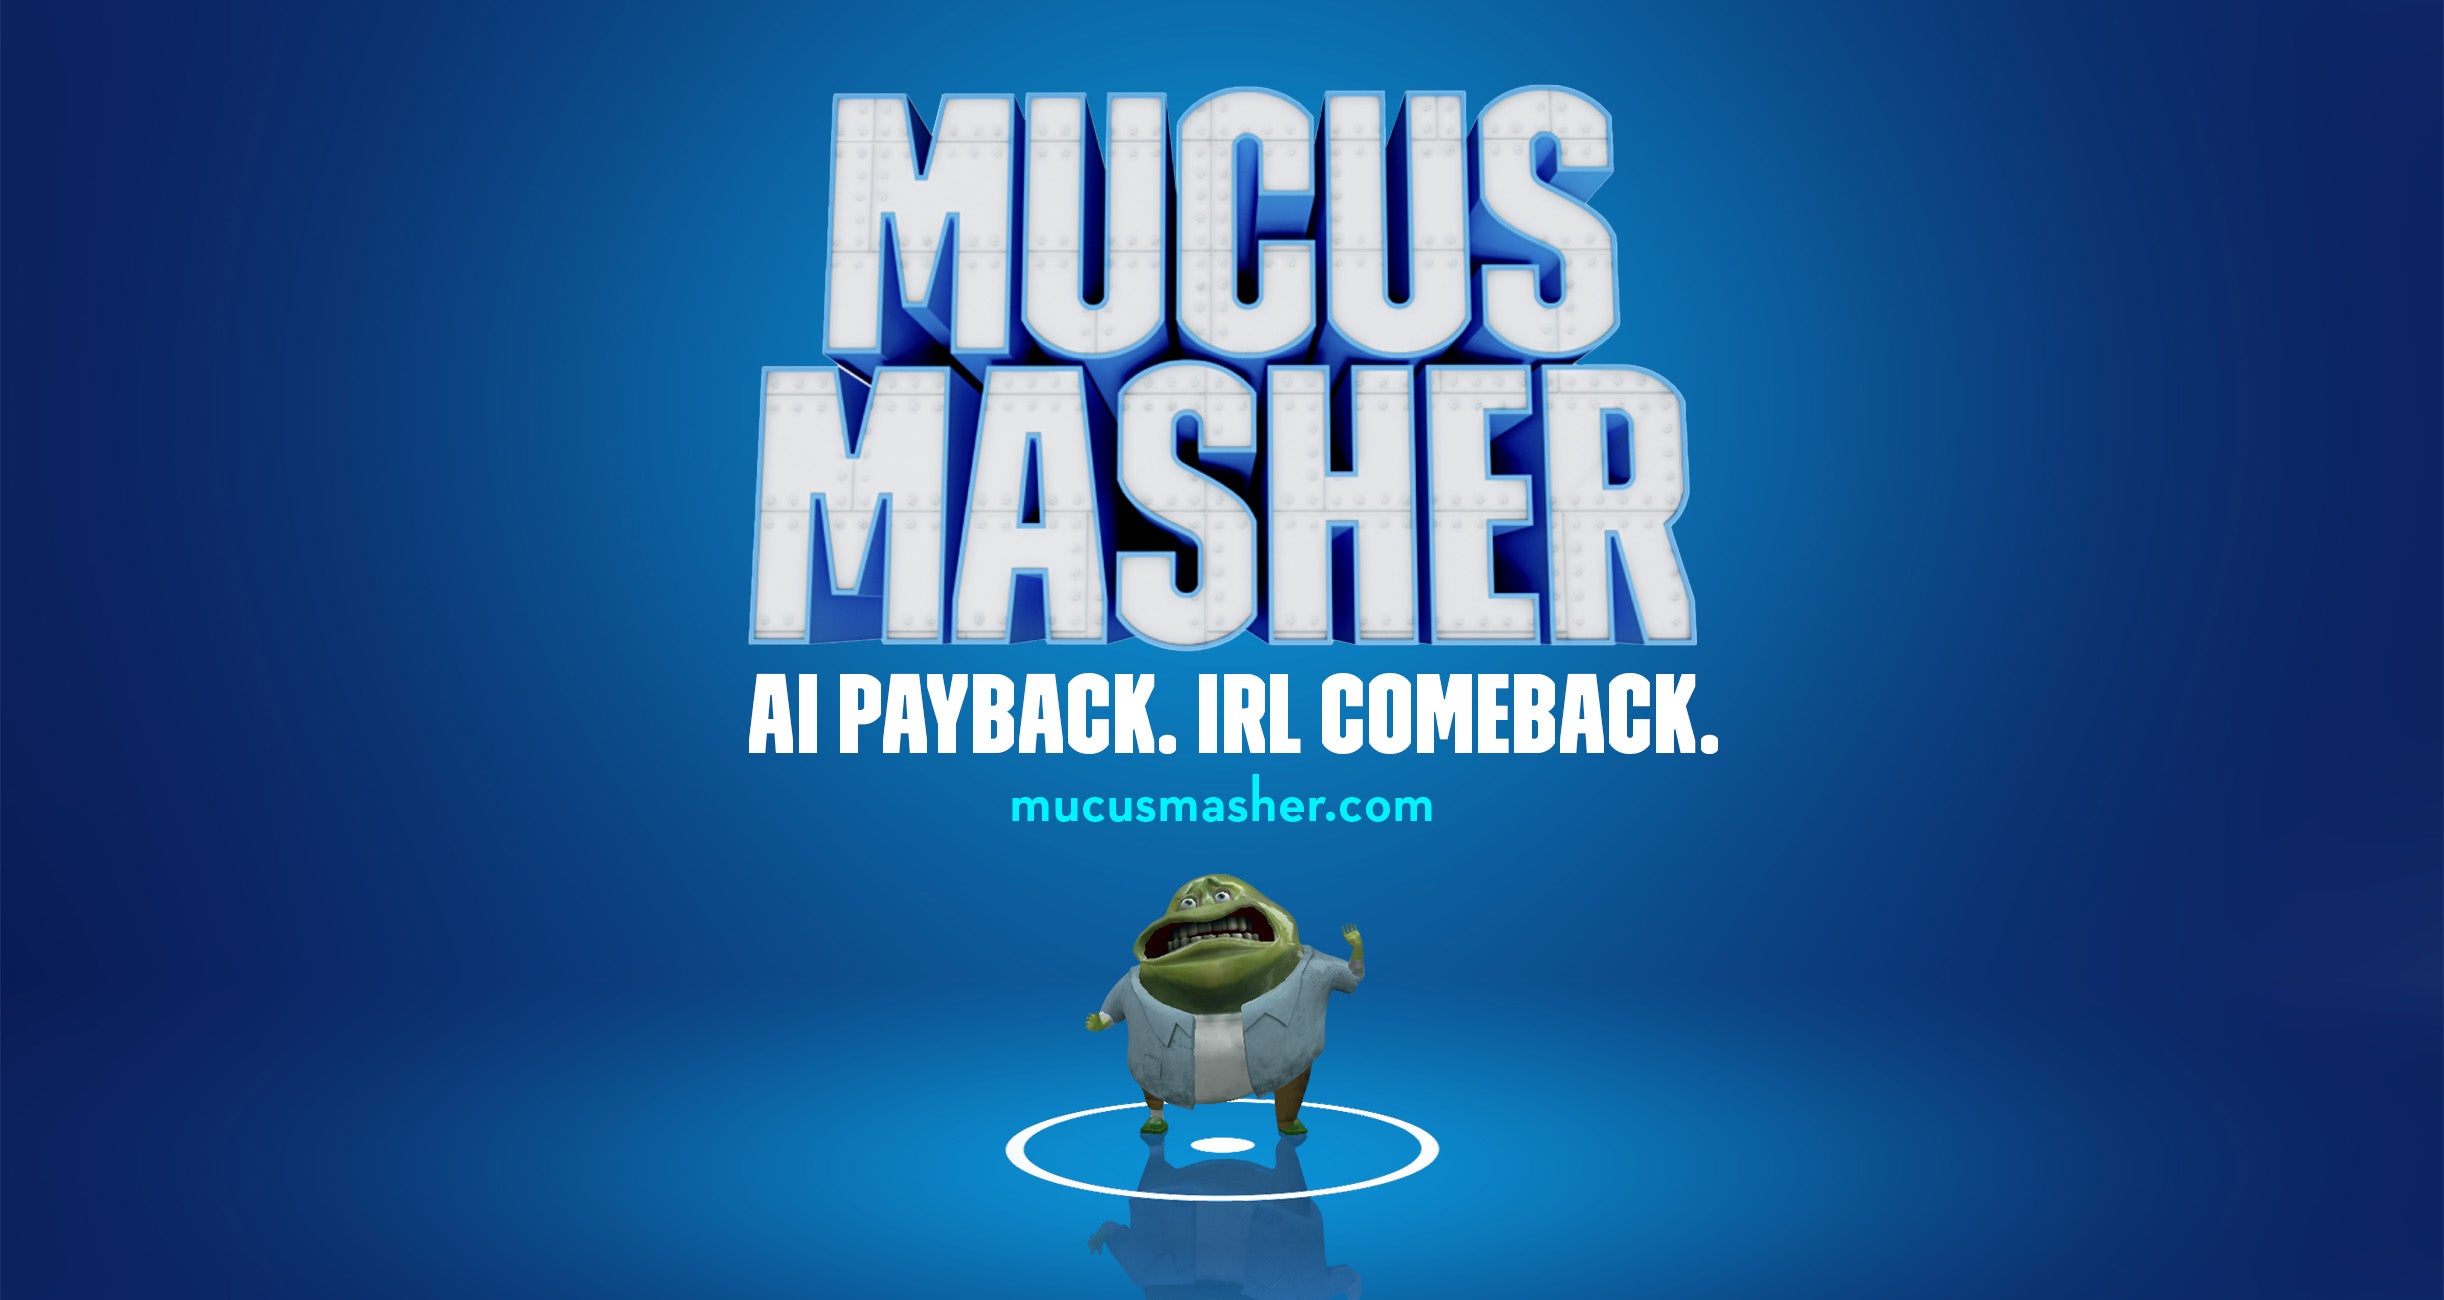 Mucus Masher All Payback. IRL Comeback.